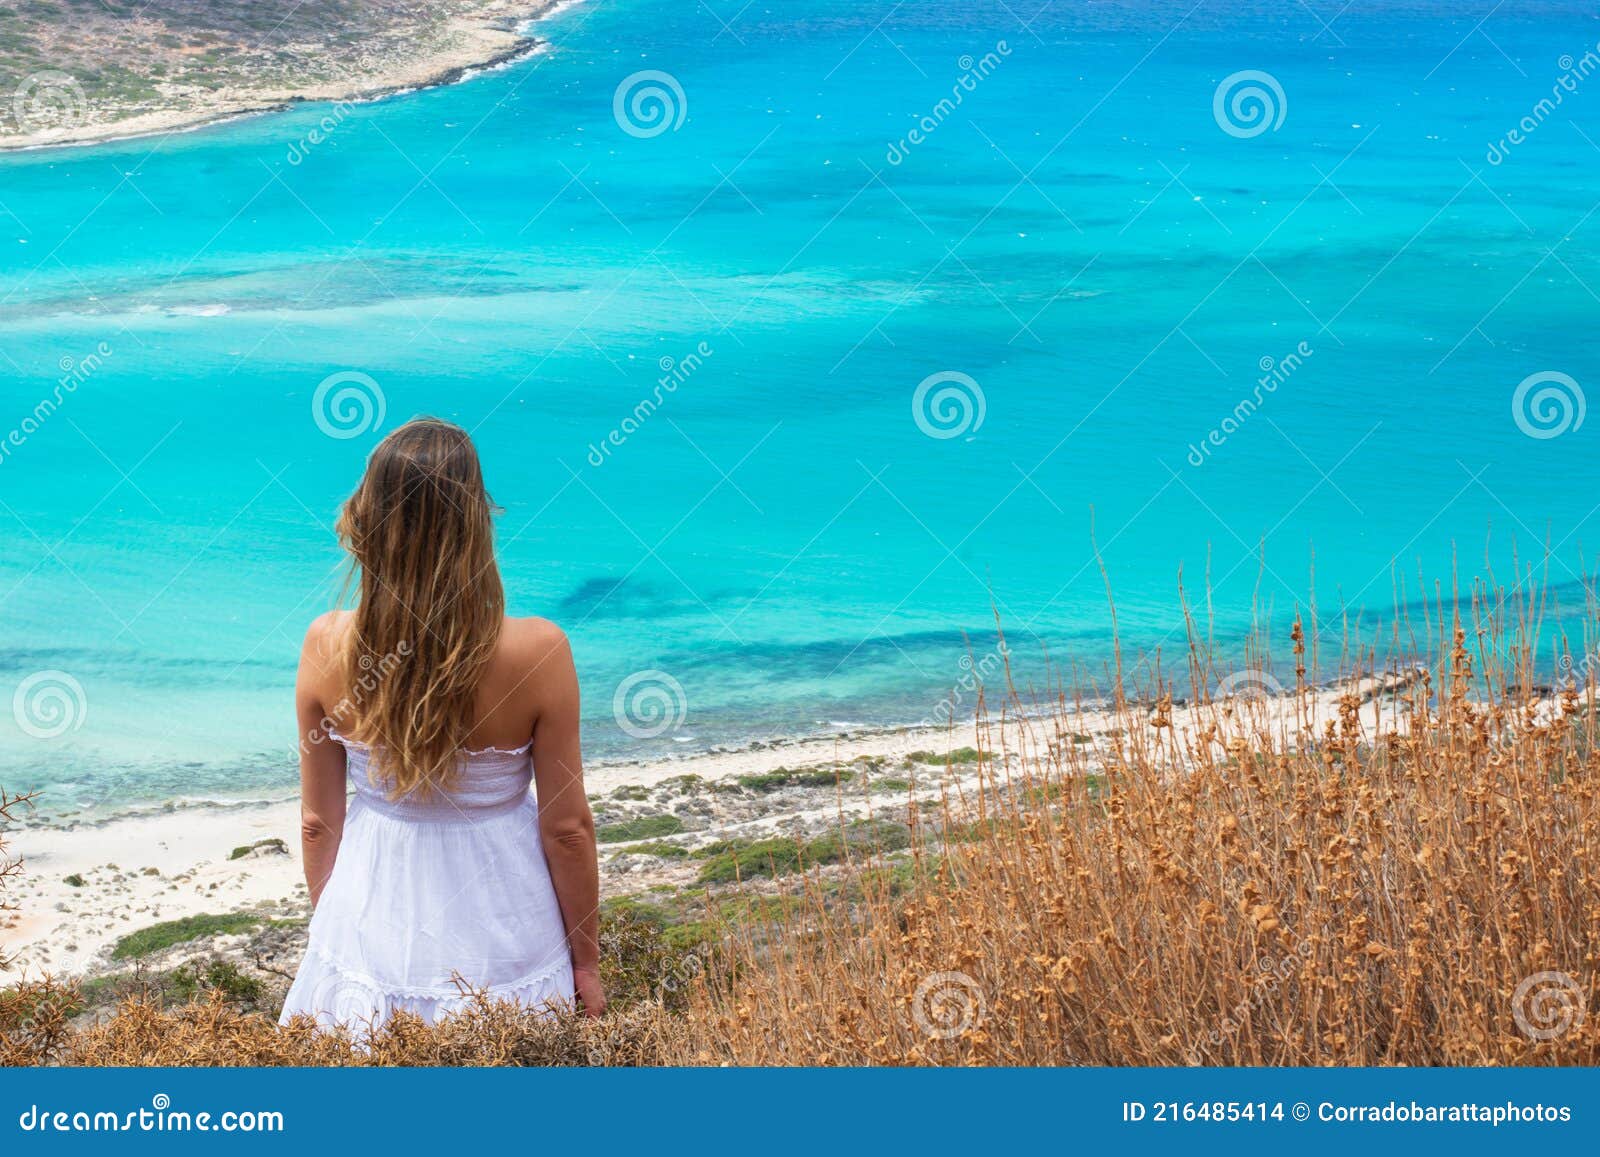 the beautiful girl in the white dress looks spellbound at the spectacular turquoise sea lagoon